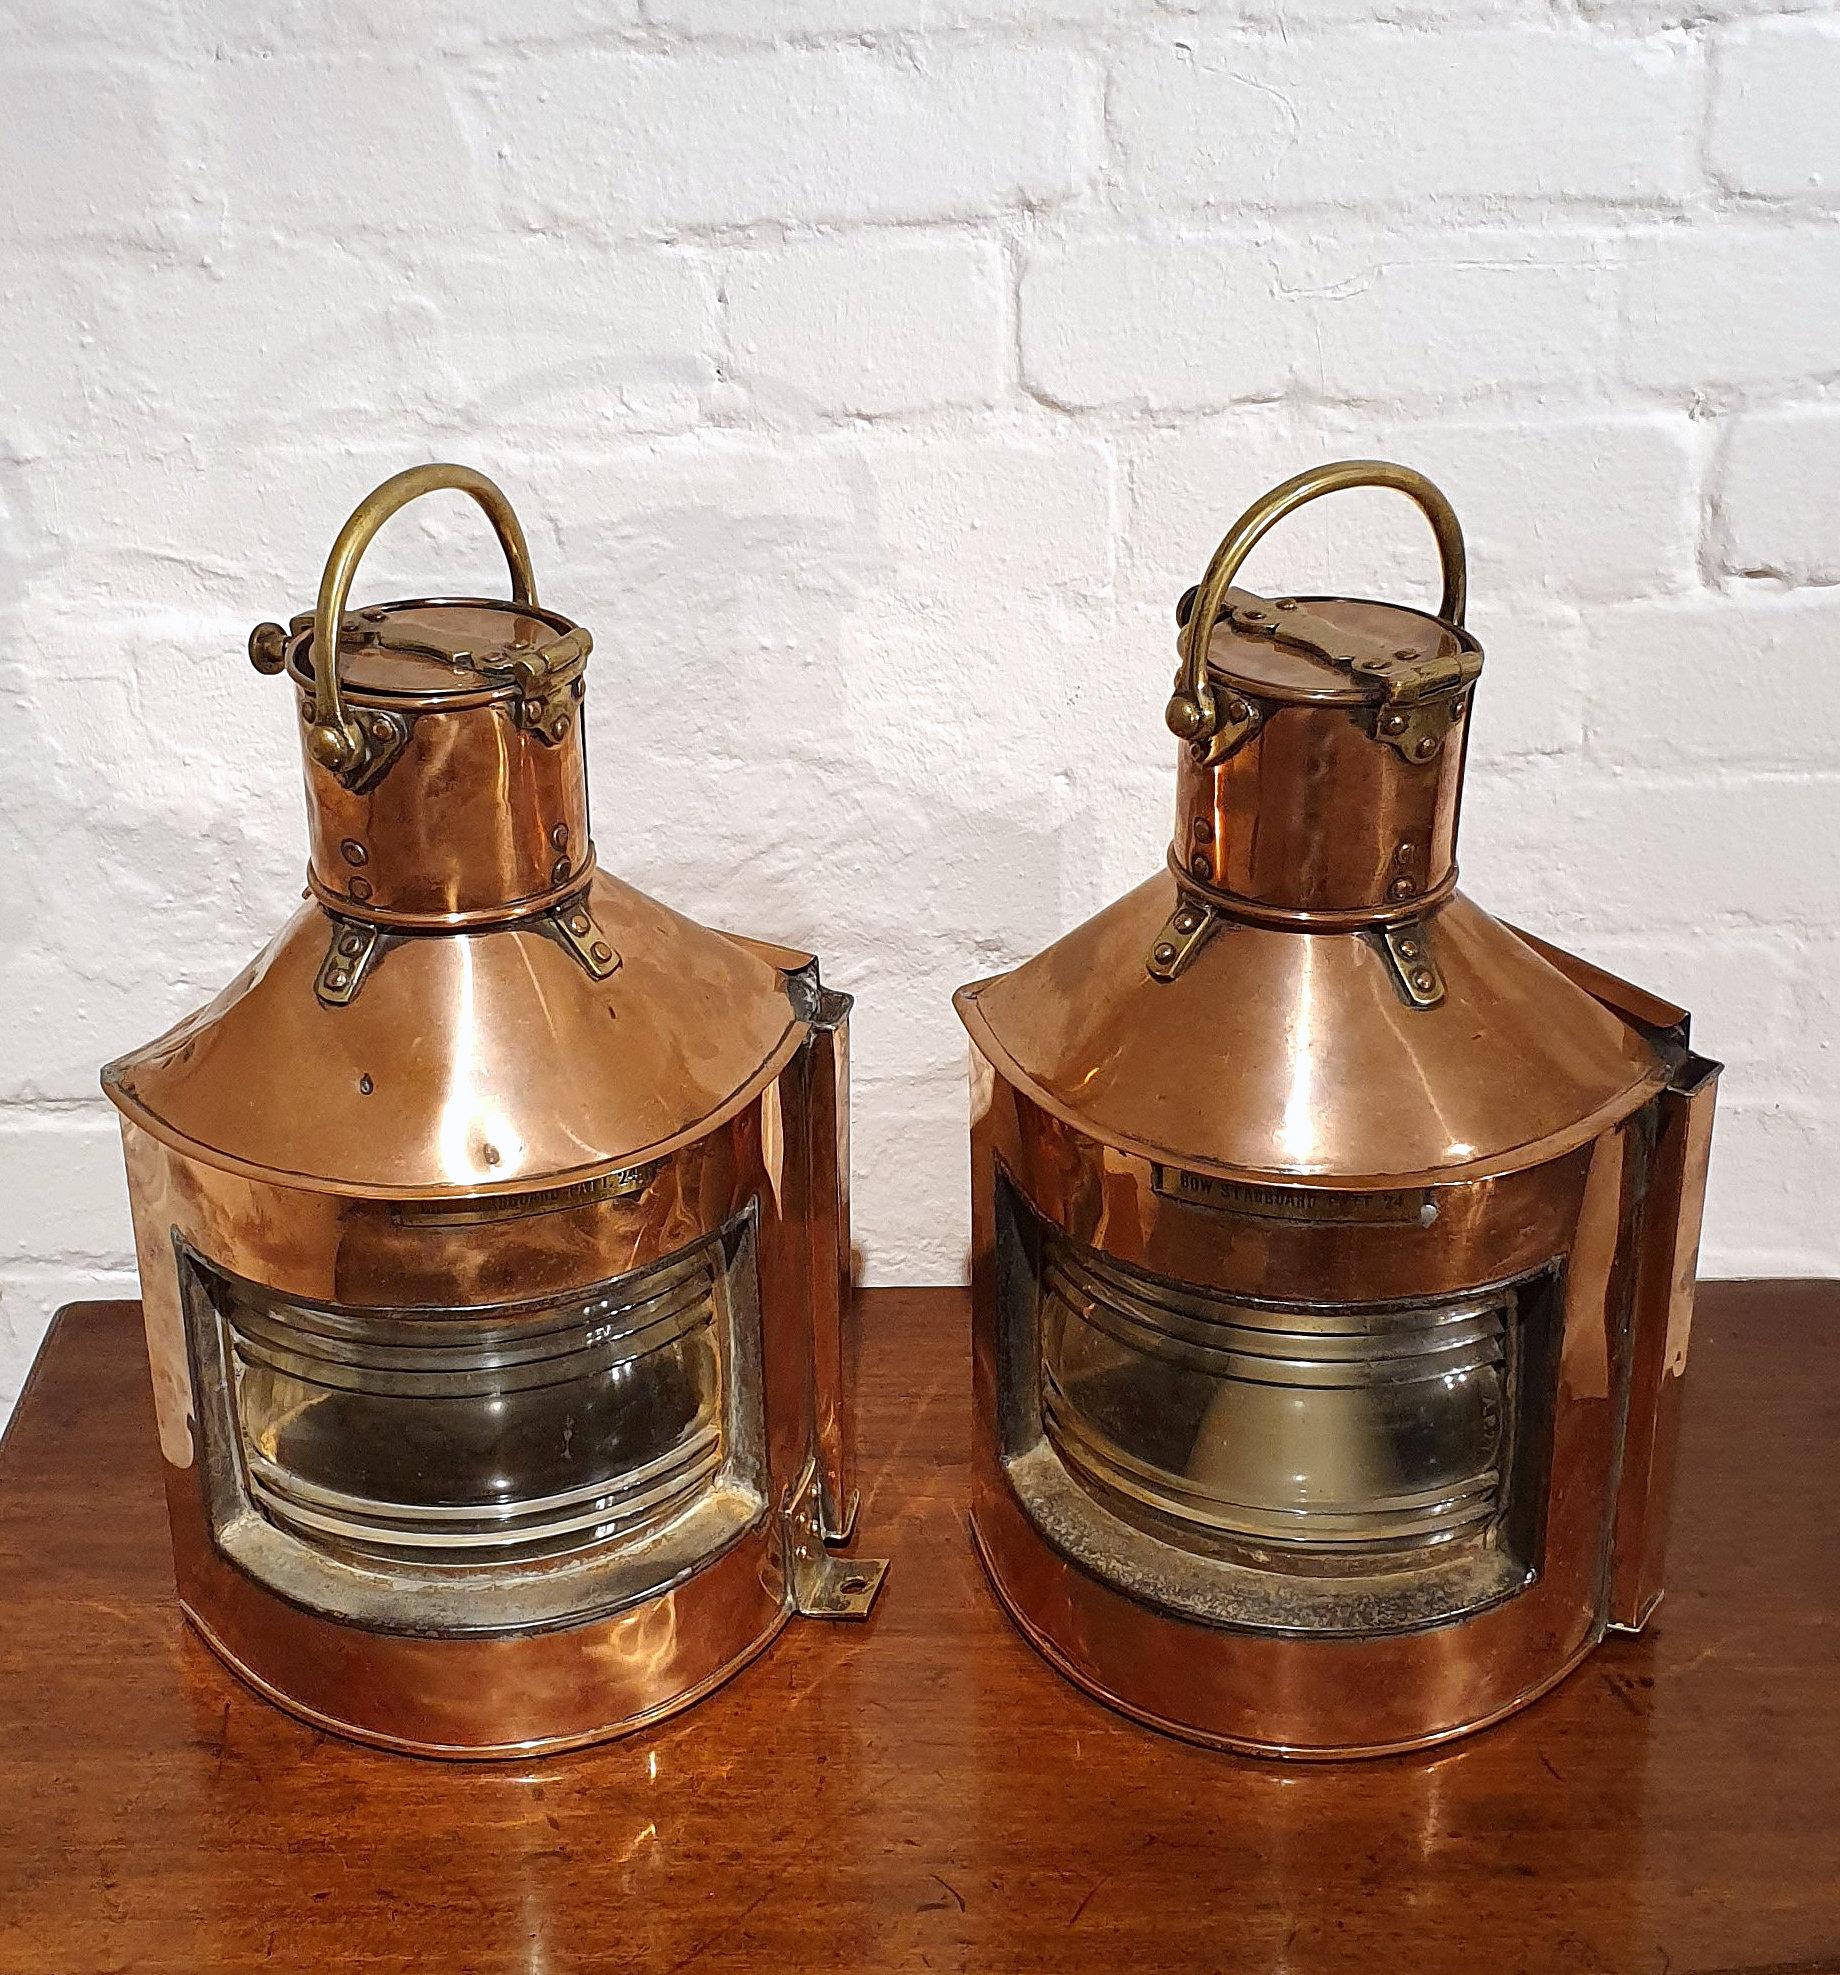 This very attractive and decorative pair of mid-20th century. Copper ship lanterns are dated 1944, which historically, is significant as it was during World War II. They are both marked Bow Starboard Patt. 24, and feature brass hardware and accent